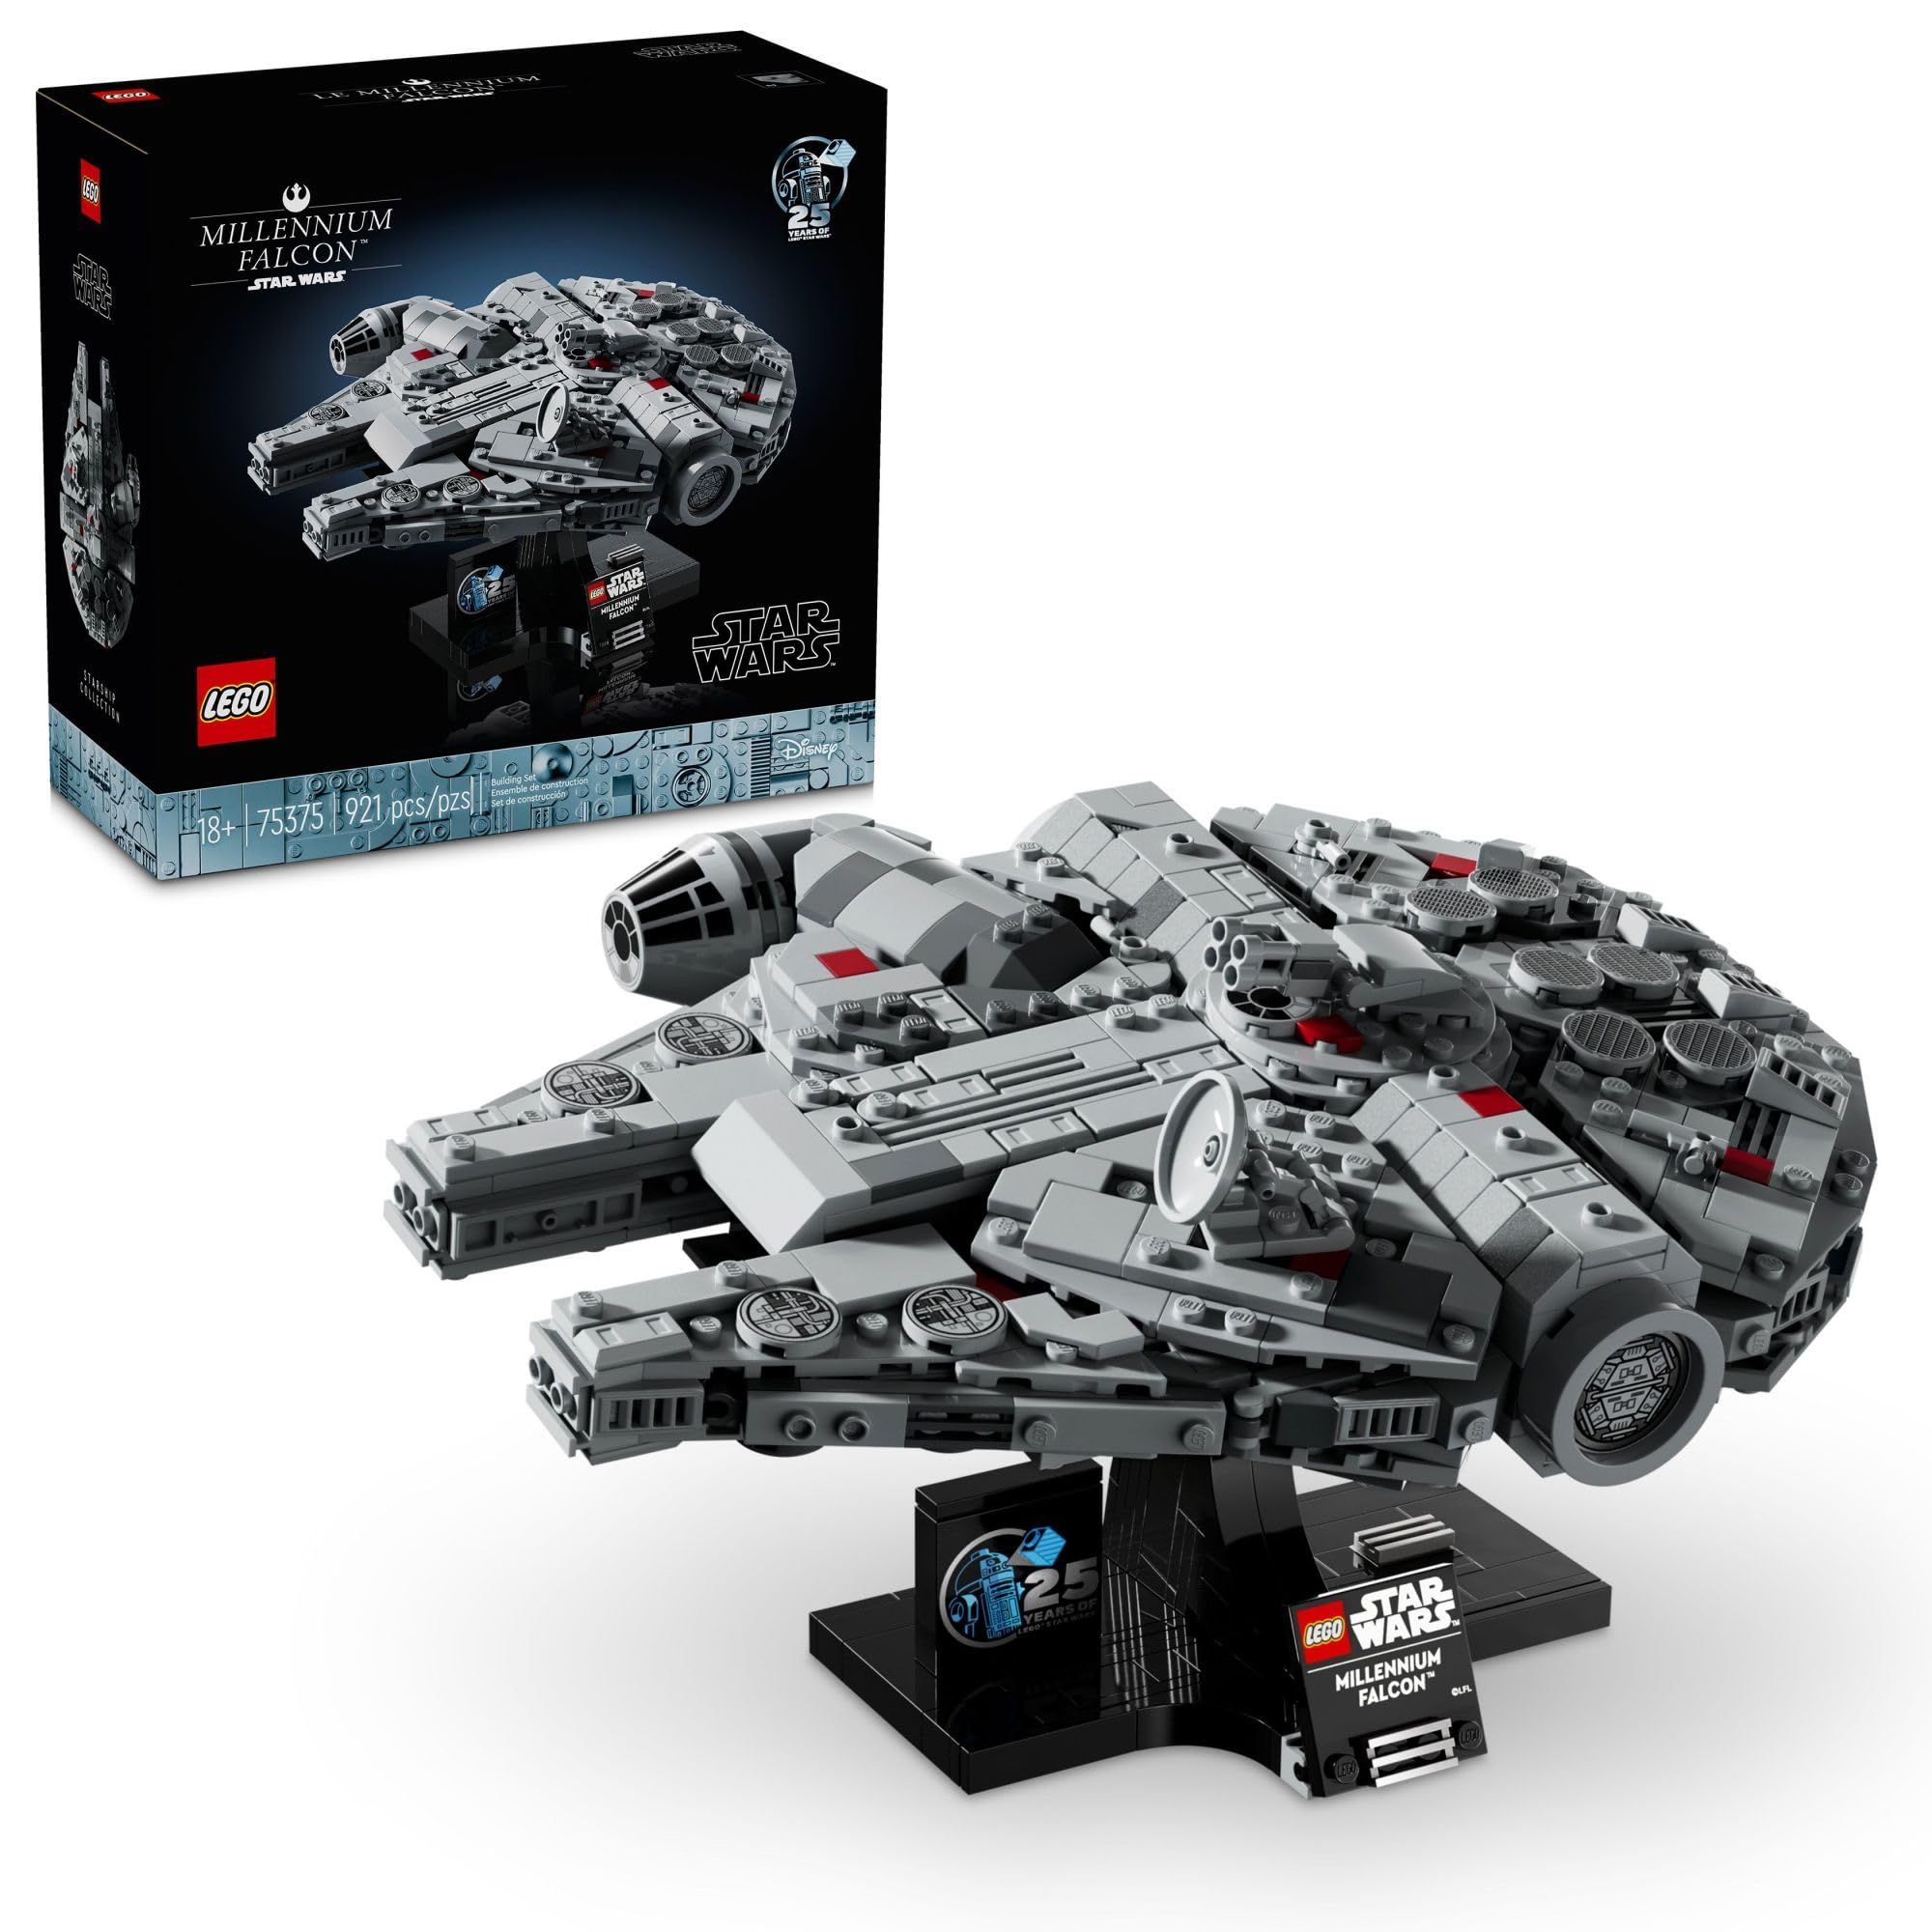 Lego's New Millennium Falcon Is the Most Affordable Version